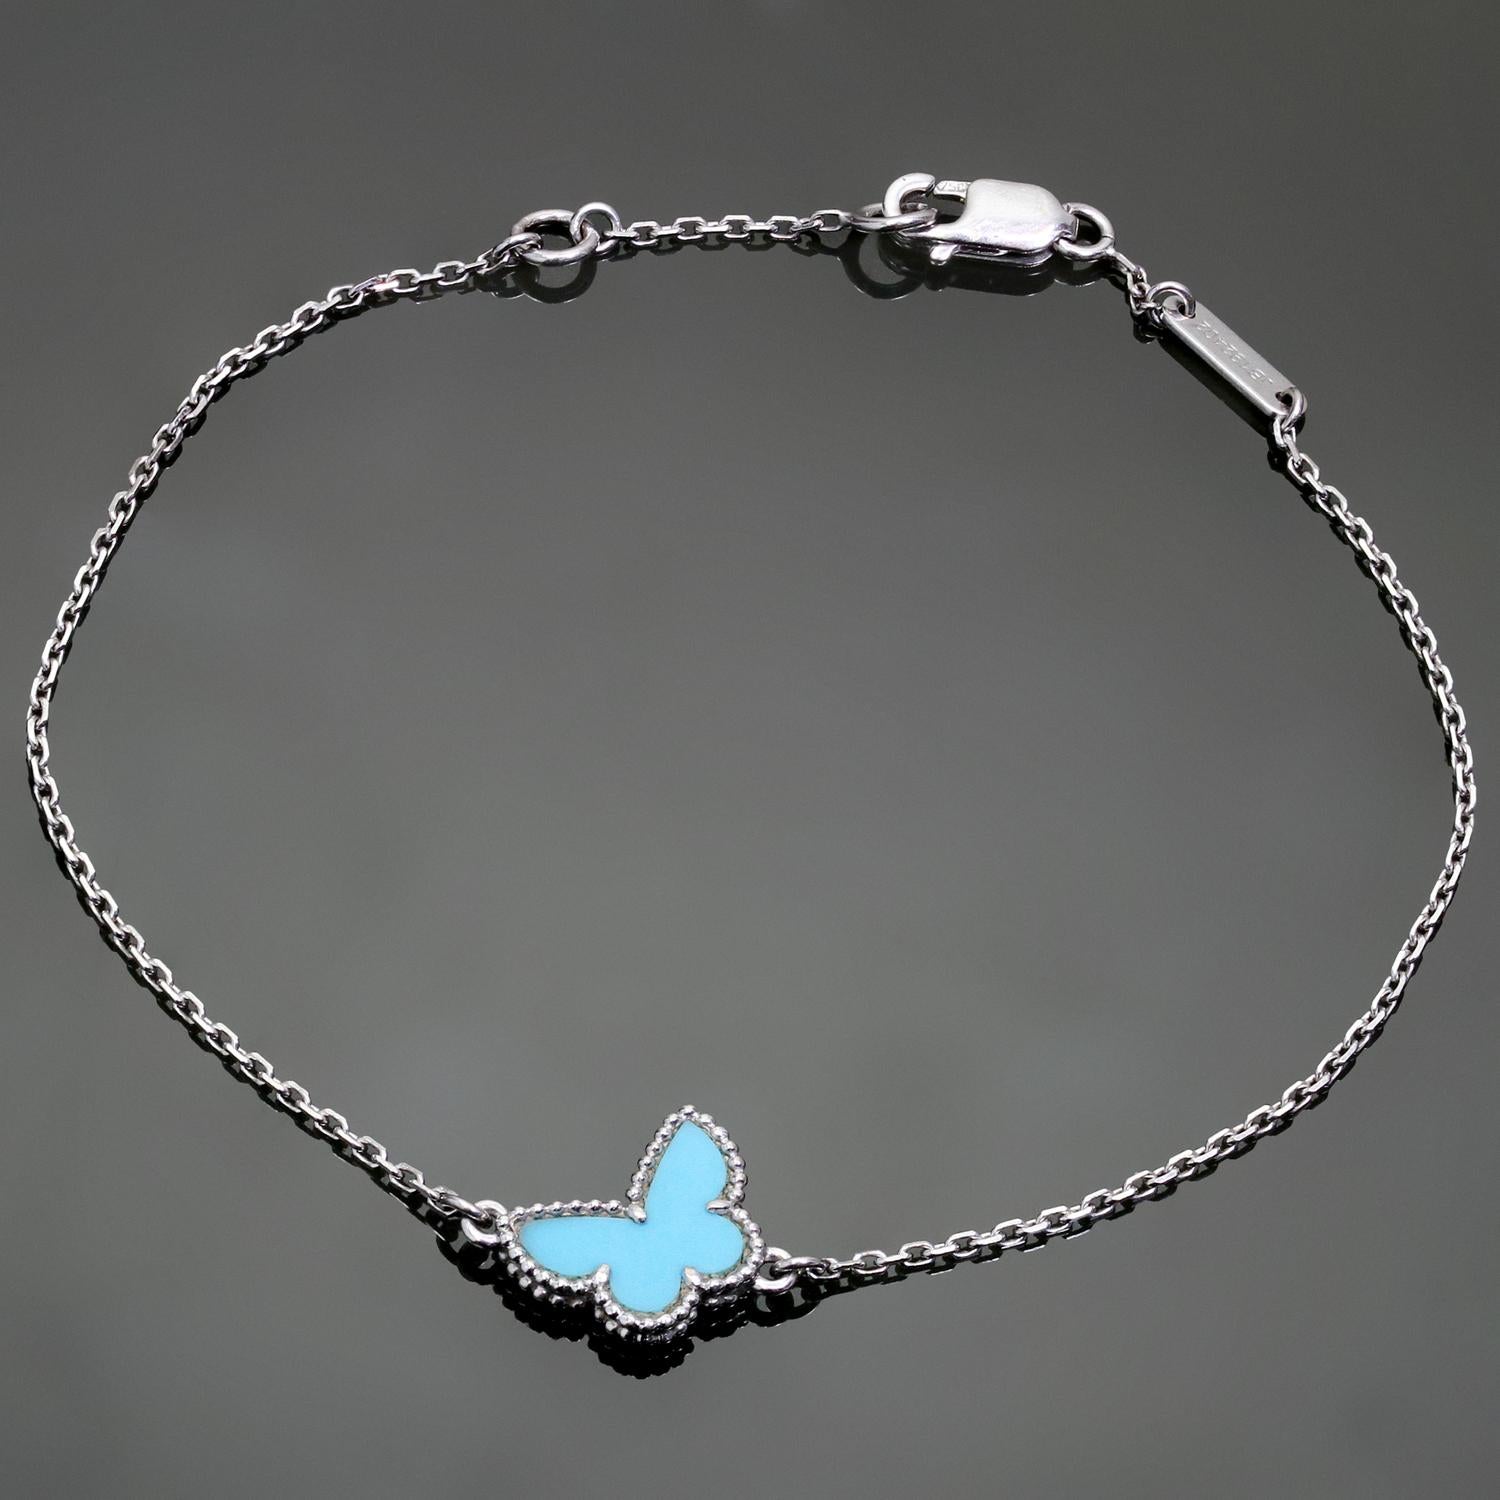 This stunning Van Cleef & Arpels bracelet from the iconic Sweet Alhambra collection feature the classic butterfly accent crafted in 18k white gold and set with blue turquoise. Made in France circa 2000s. Measurements: 0.38